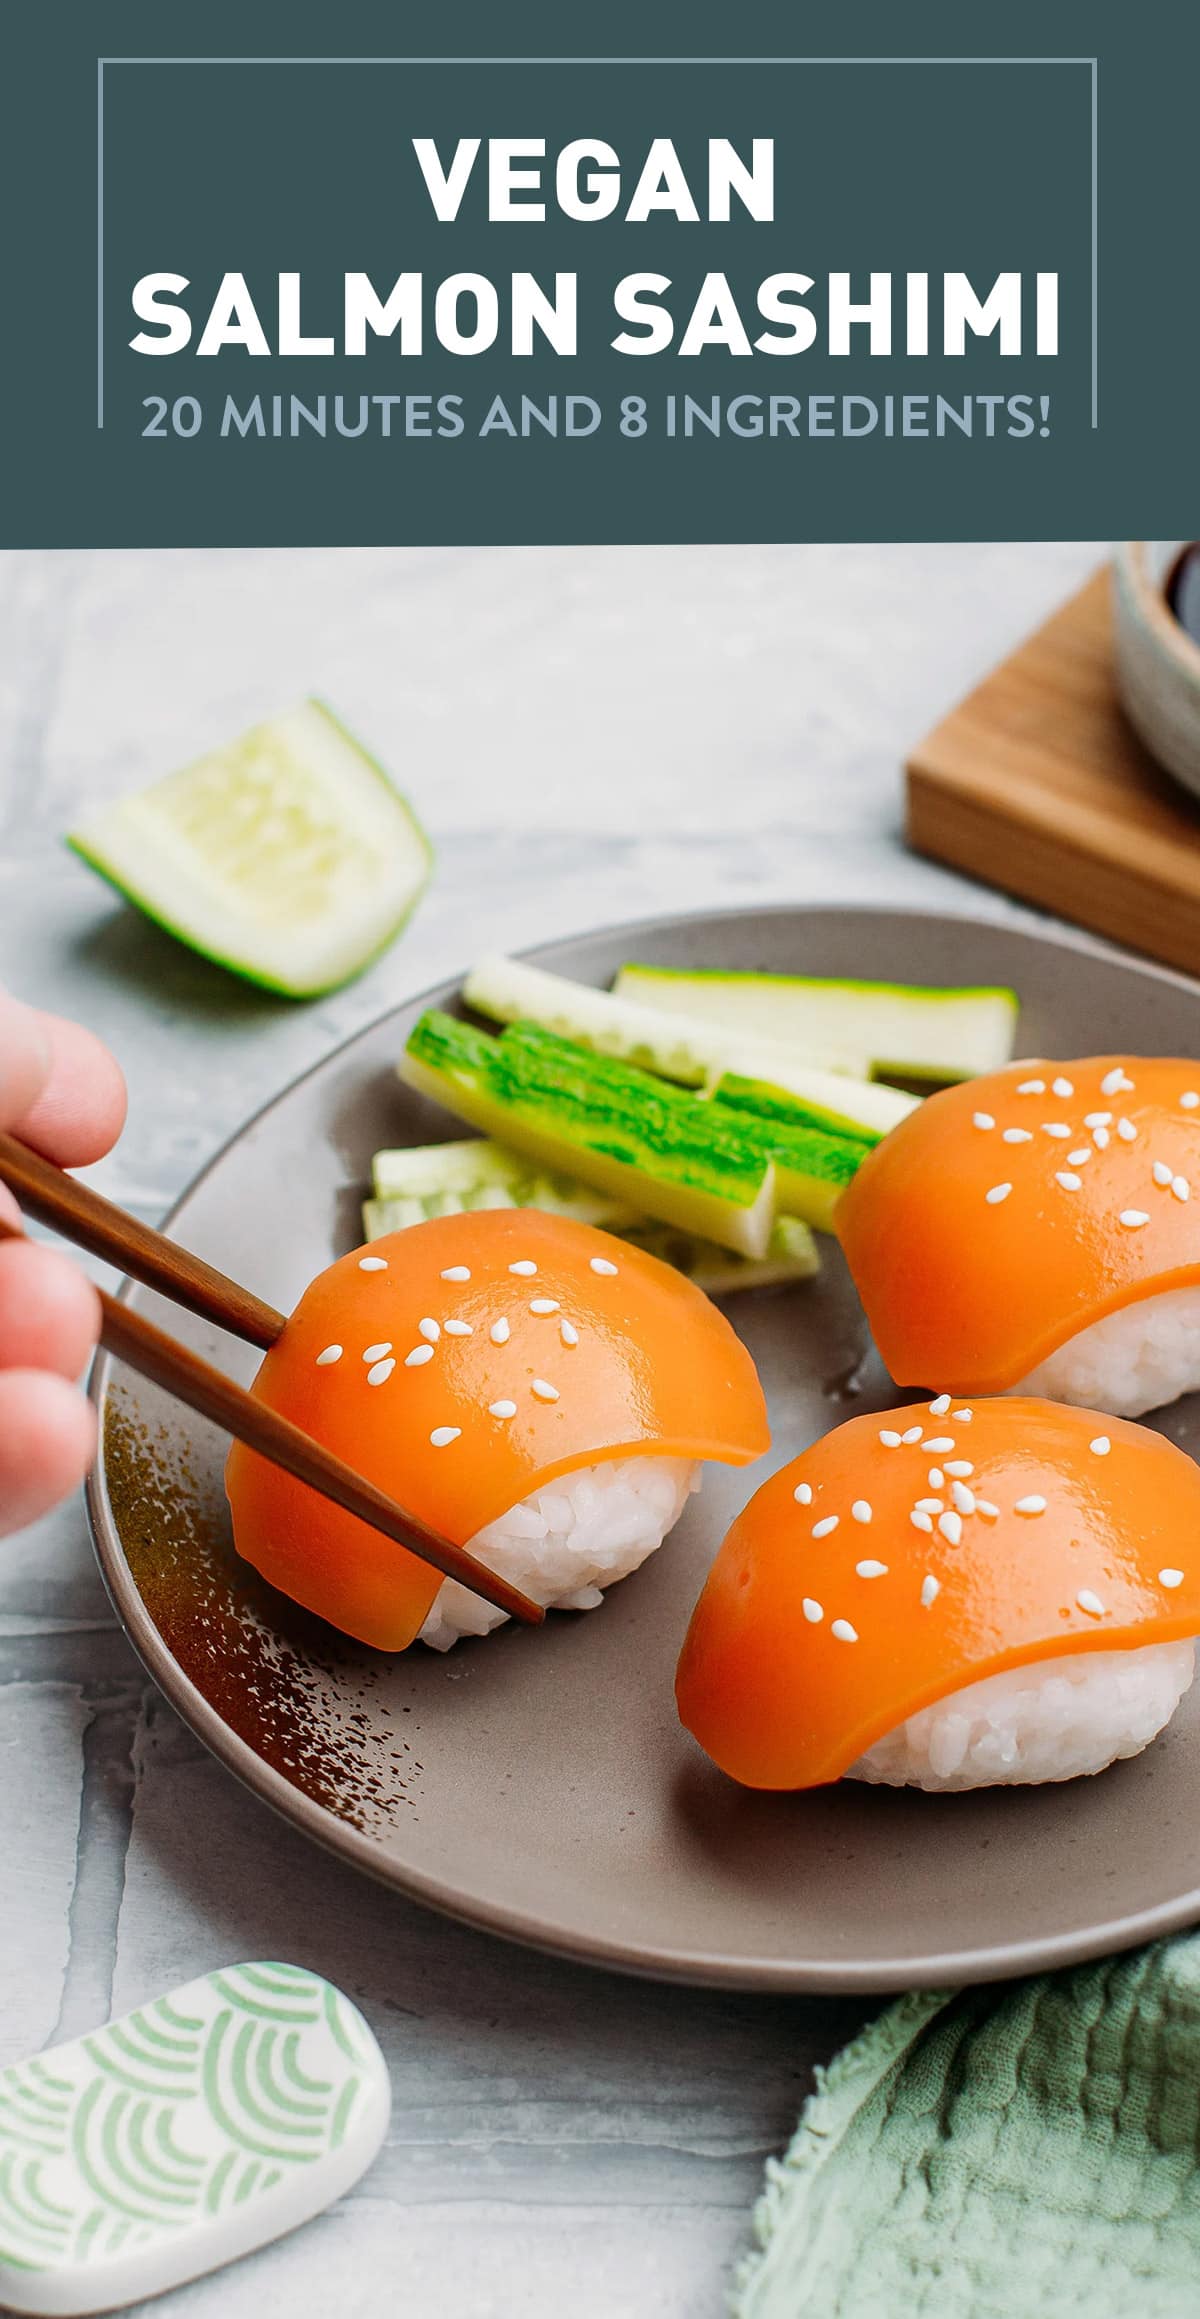 Introducing the most AMAZING vegan salmon sashimi! You will never believe this salmon is actually 100% vegan! It's rich, buttery, slightly fishy, and melts in your mouth. Perfect for nigiri, sushi, poke bowls, and more! #vegan #salmon #plantbased #sashimi